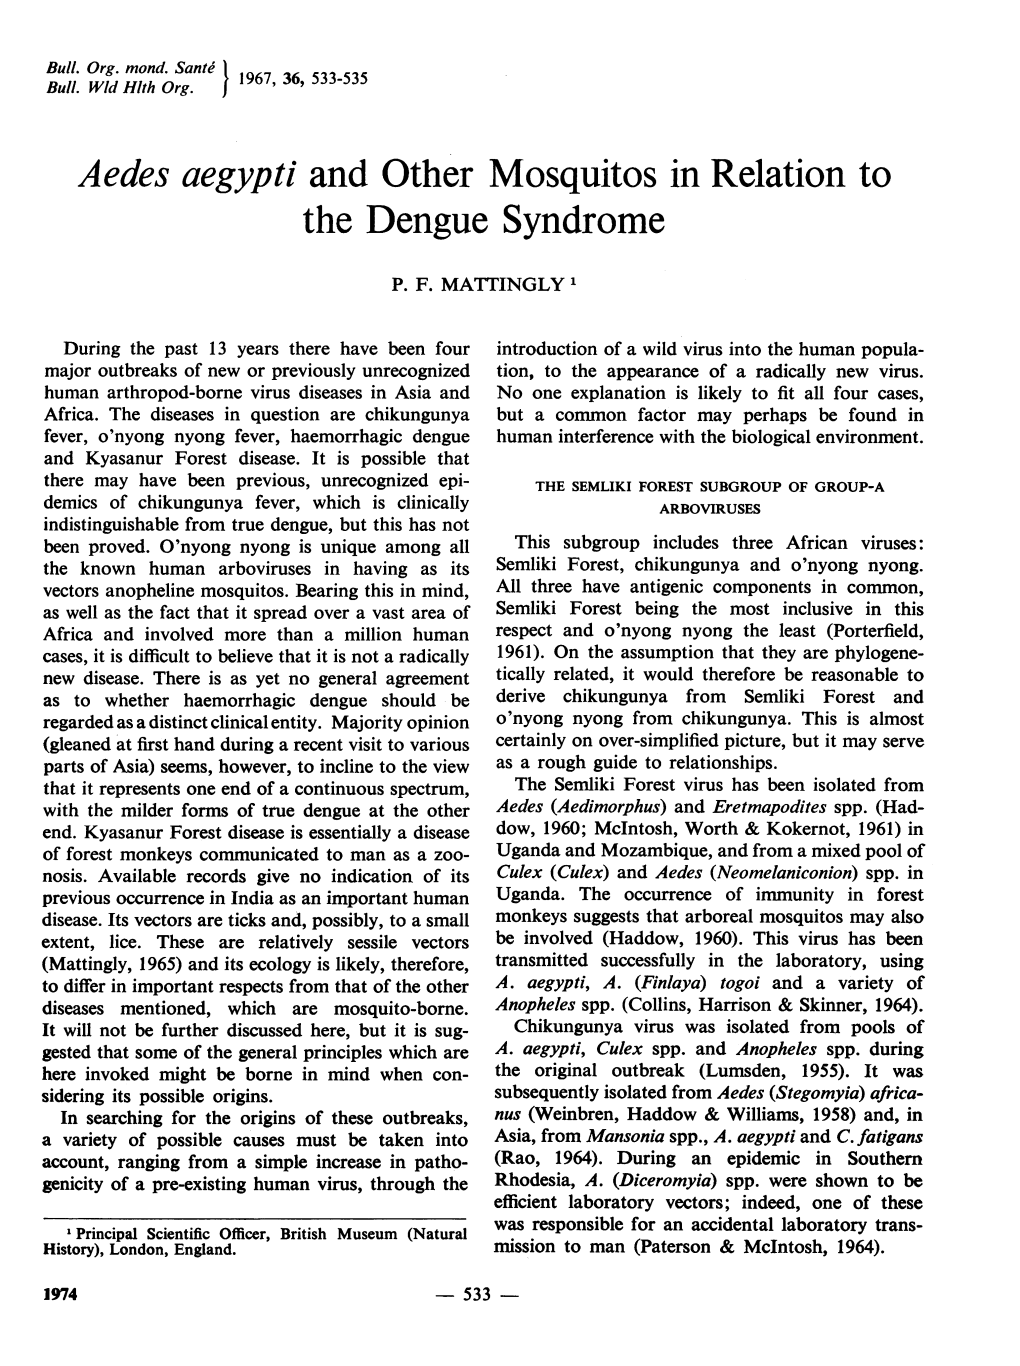 Aedes Aegypti and Other Mosquitos in Relation to the Dengue Syndrome